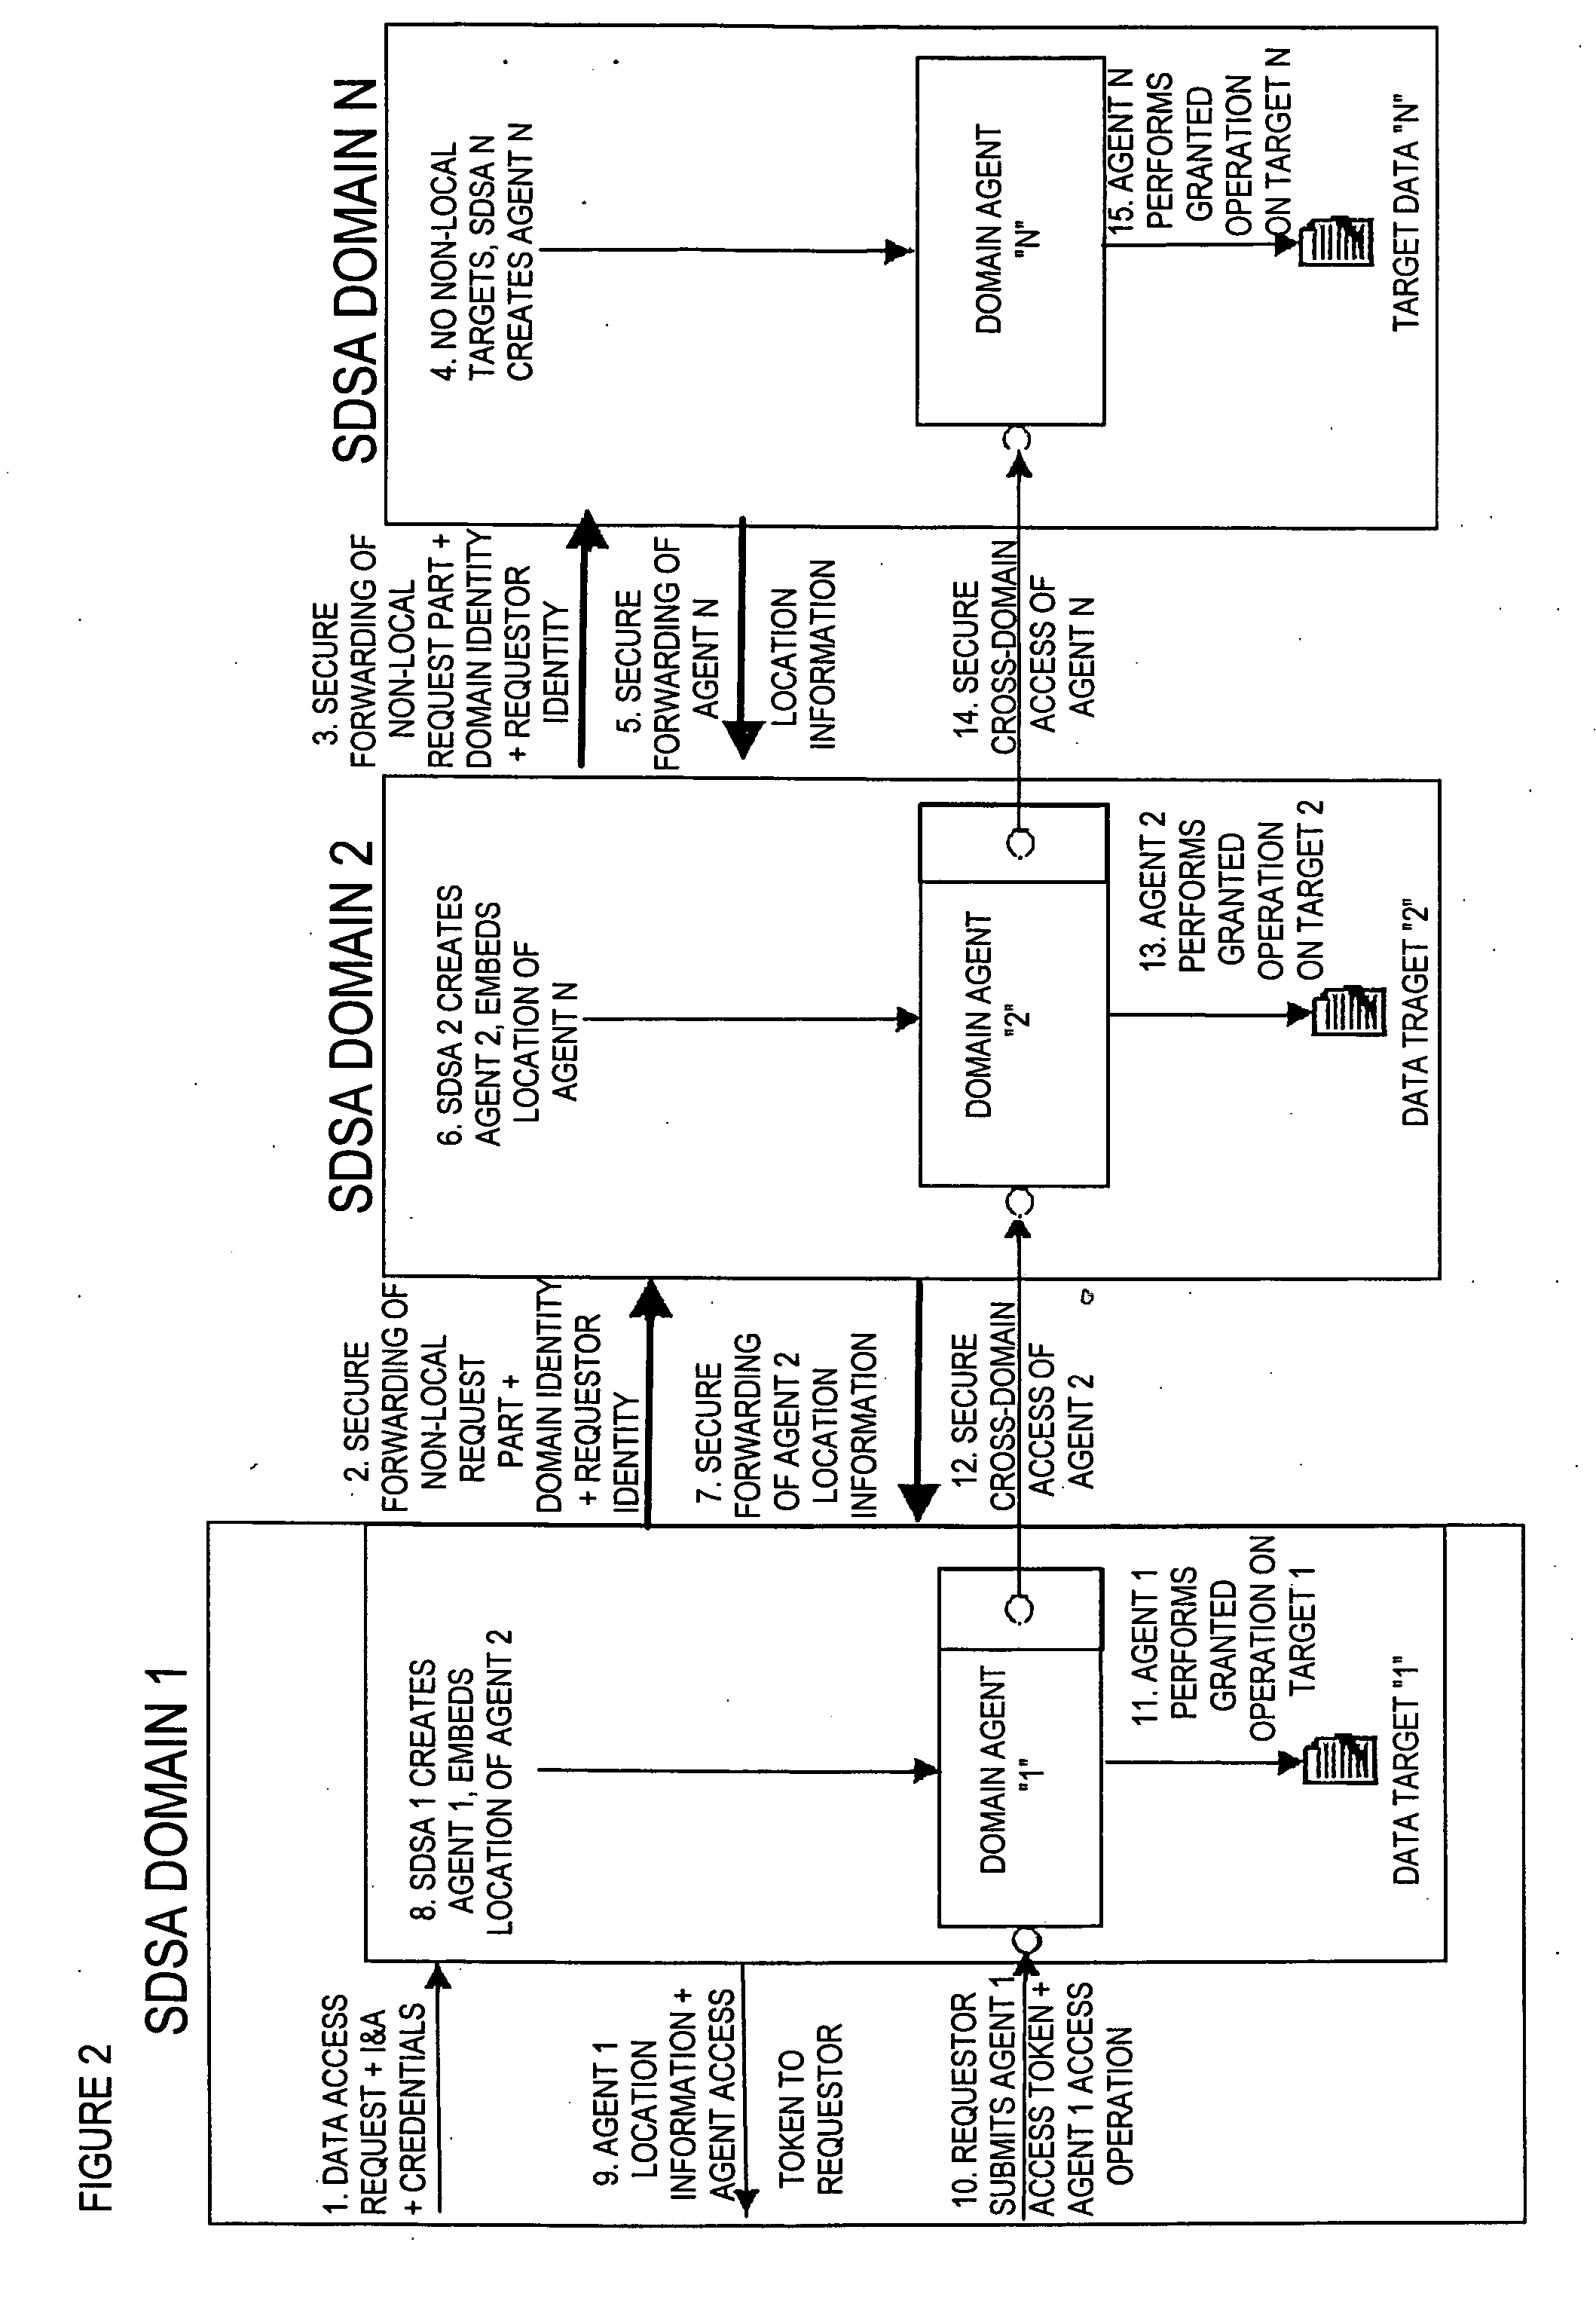 Method and apparatus for providing secure access control for protected information